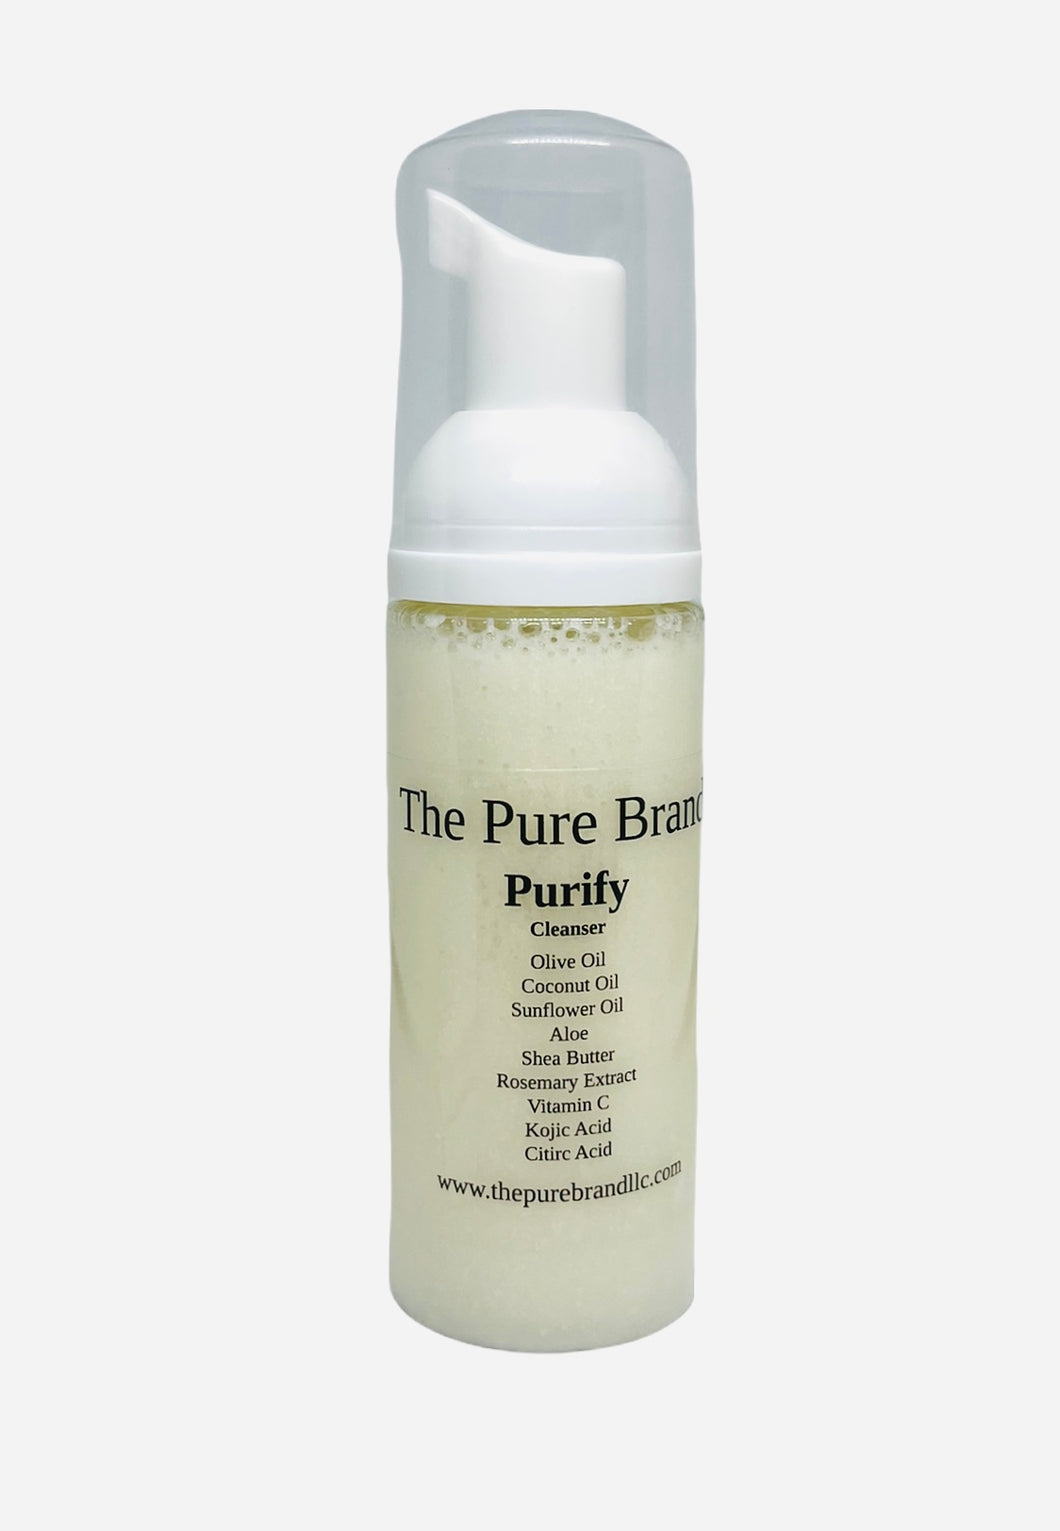 Purify Foaming Cleanser